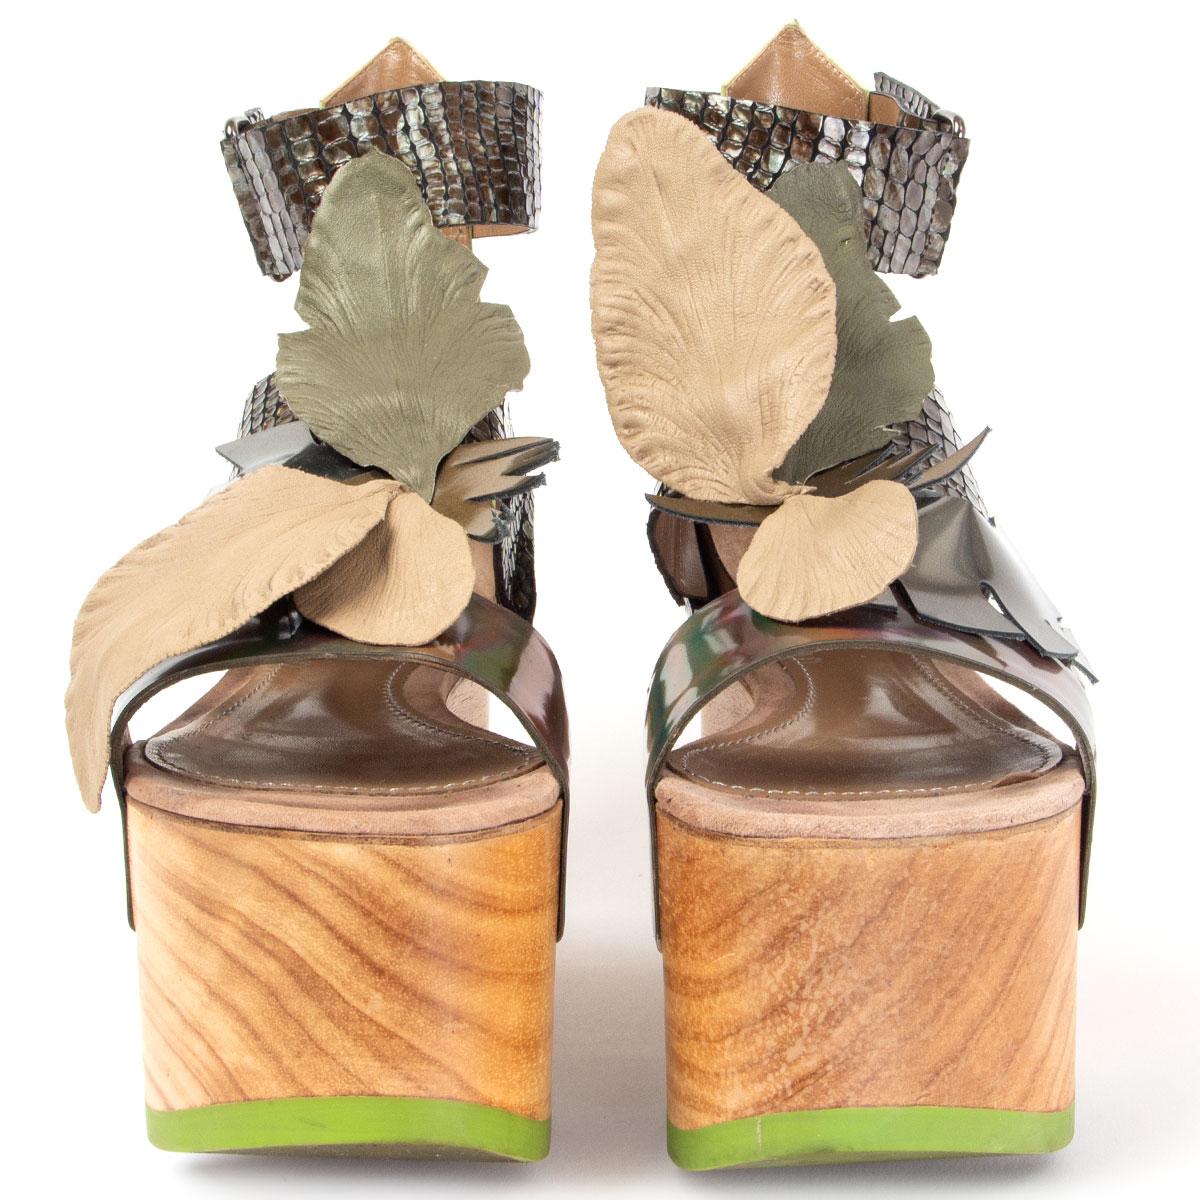 100% authentic John Galliano wooden ankle-strap platform sandals in light green, brown embossed and holographic brown patent leather embellished with taupe and olive green leaves. Have been worn and are in excellent condition.